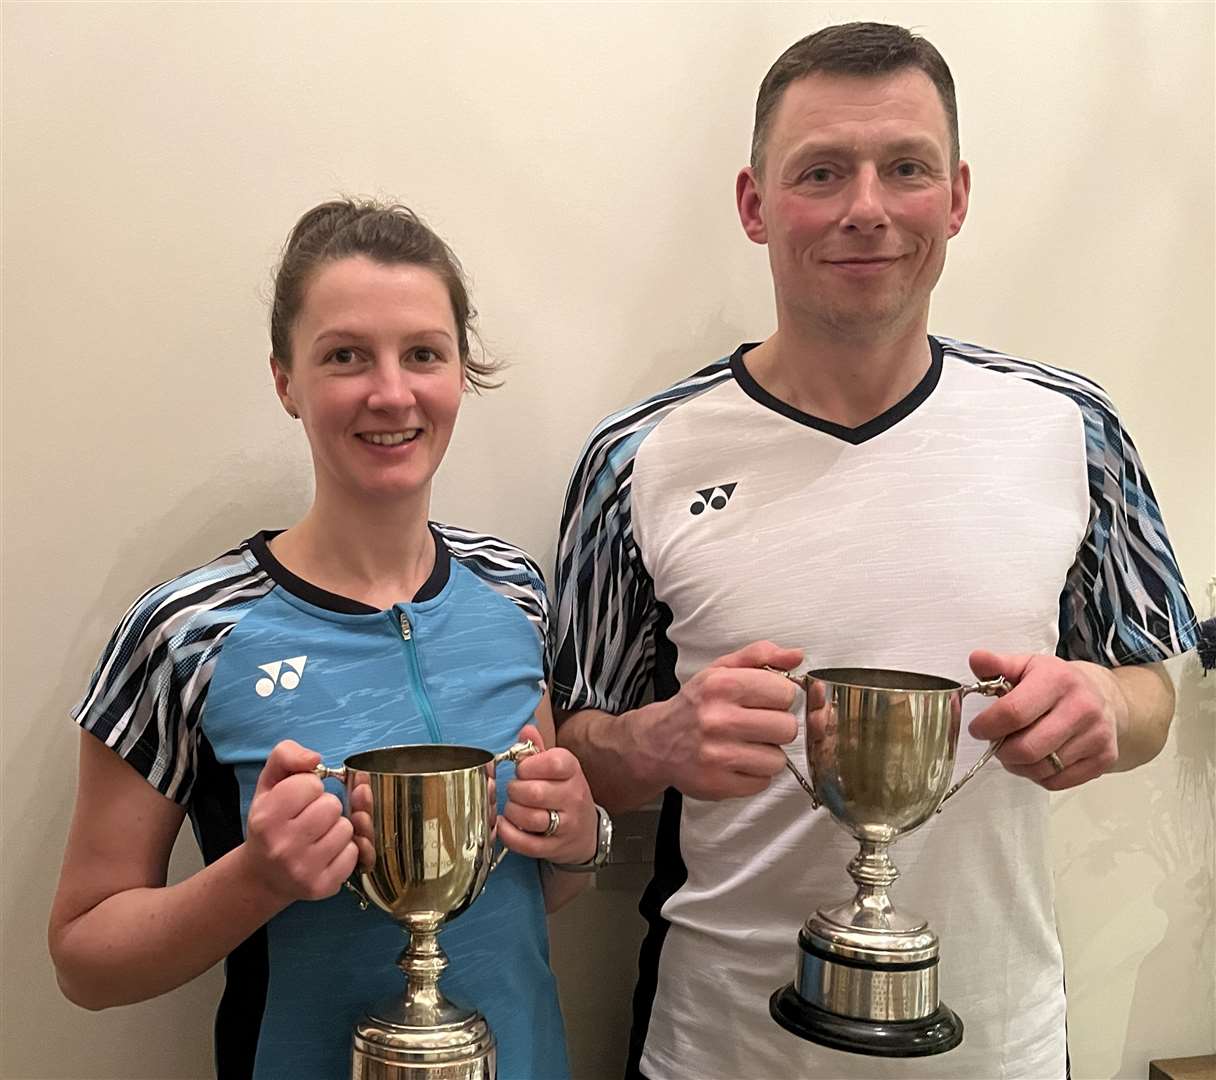 Shona and Mark Mackay after winning the mixed doubles title at the Glasgow Yonex Championships earlier this year.